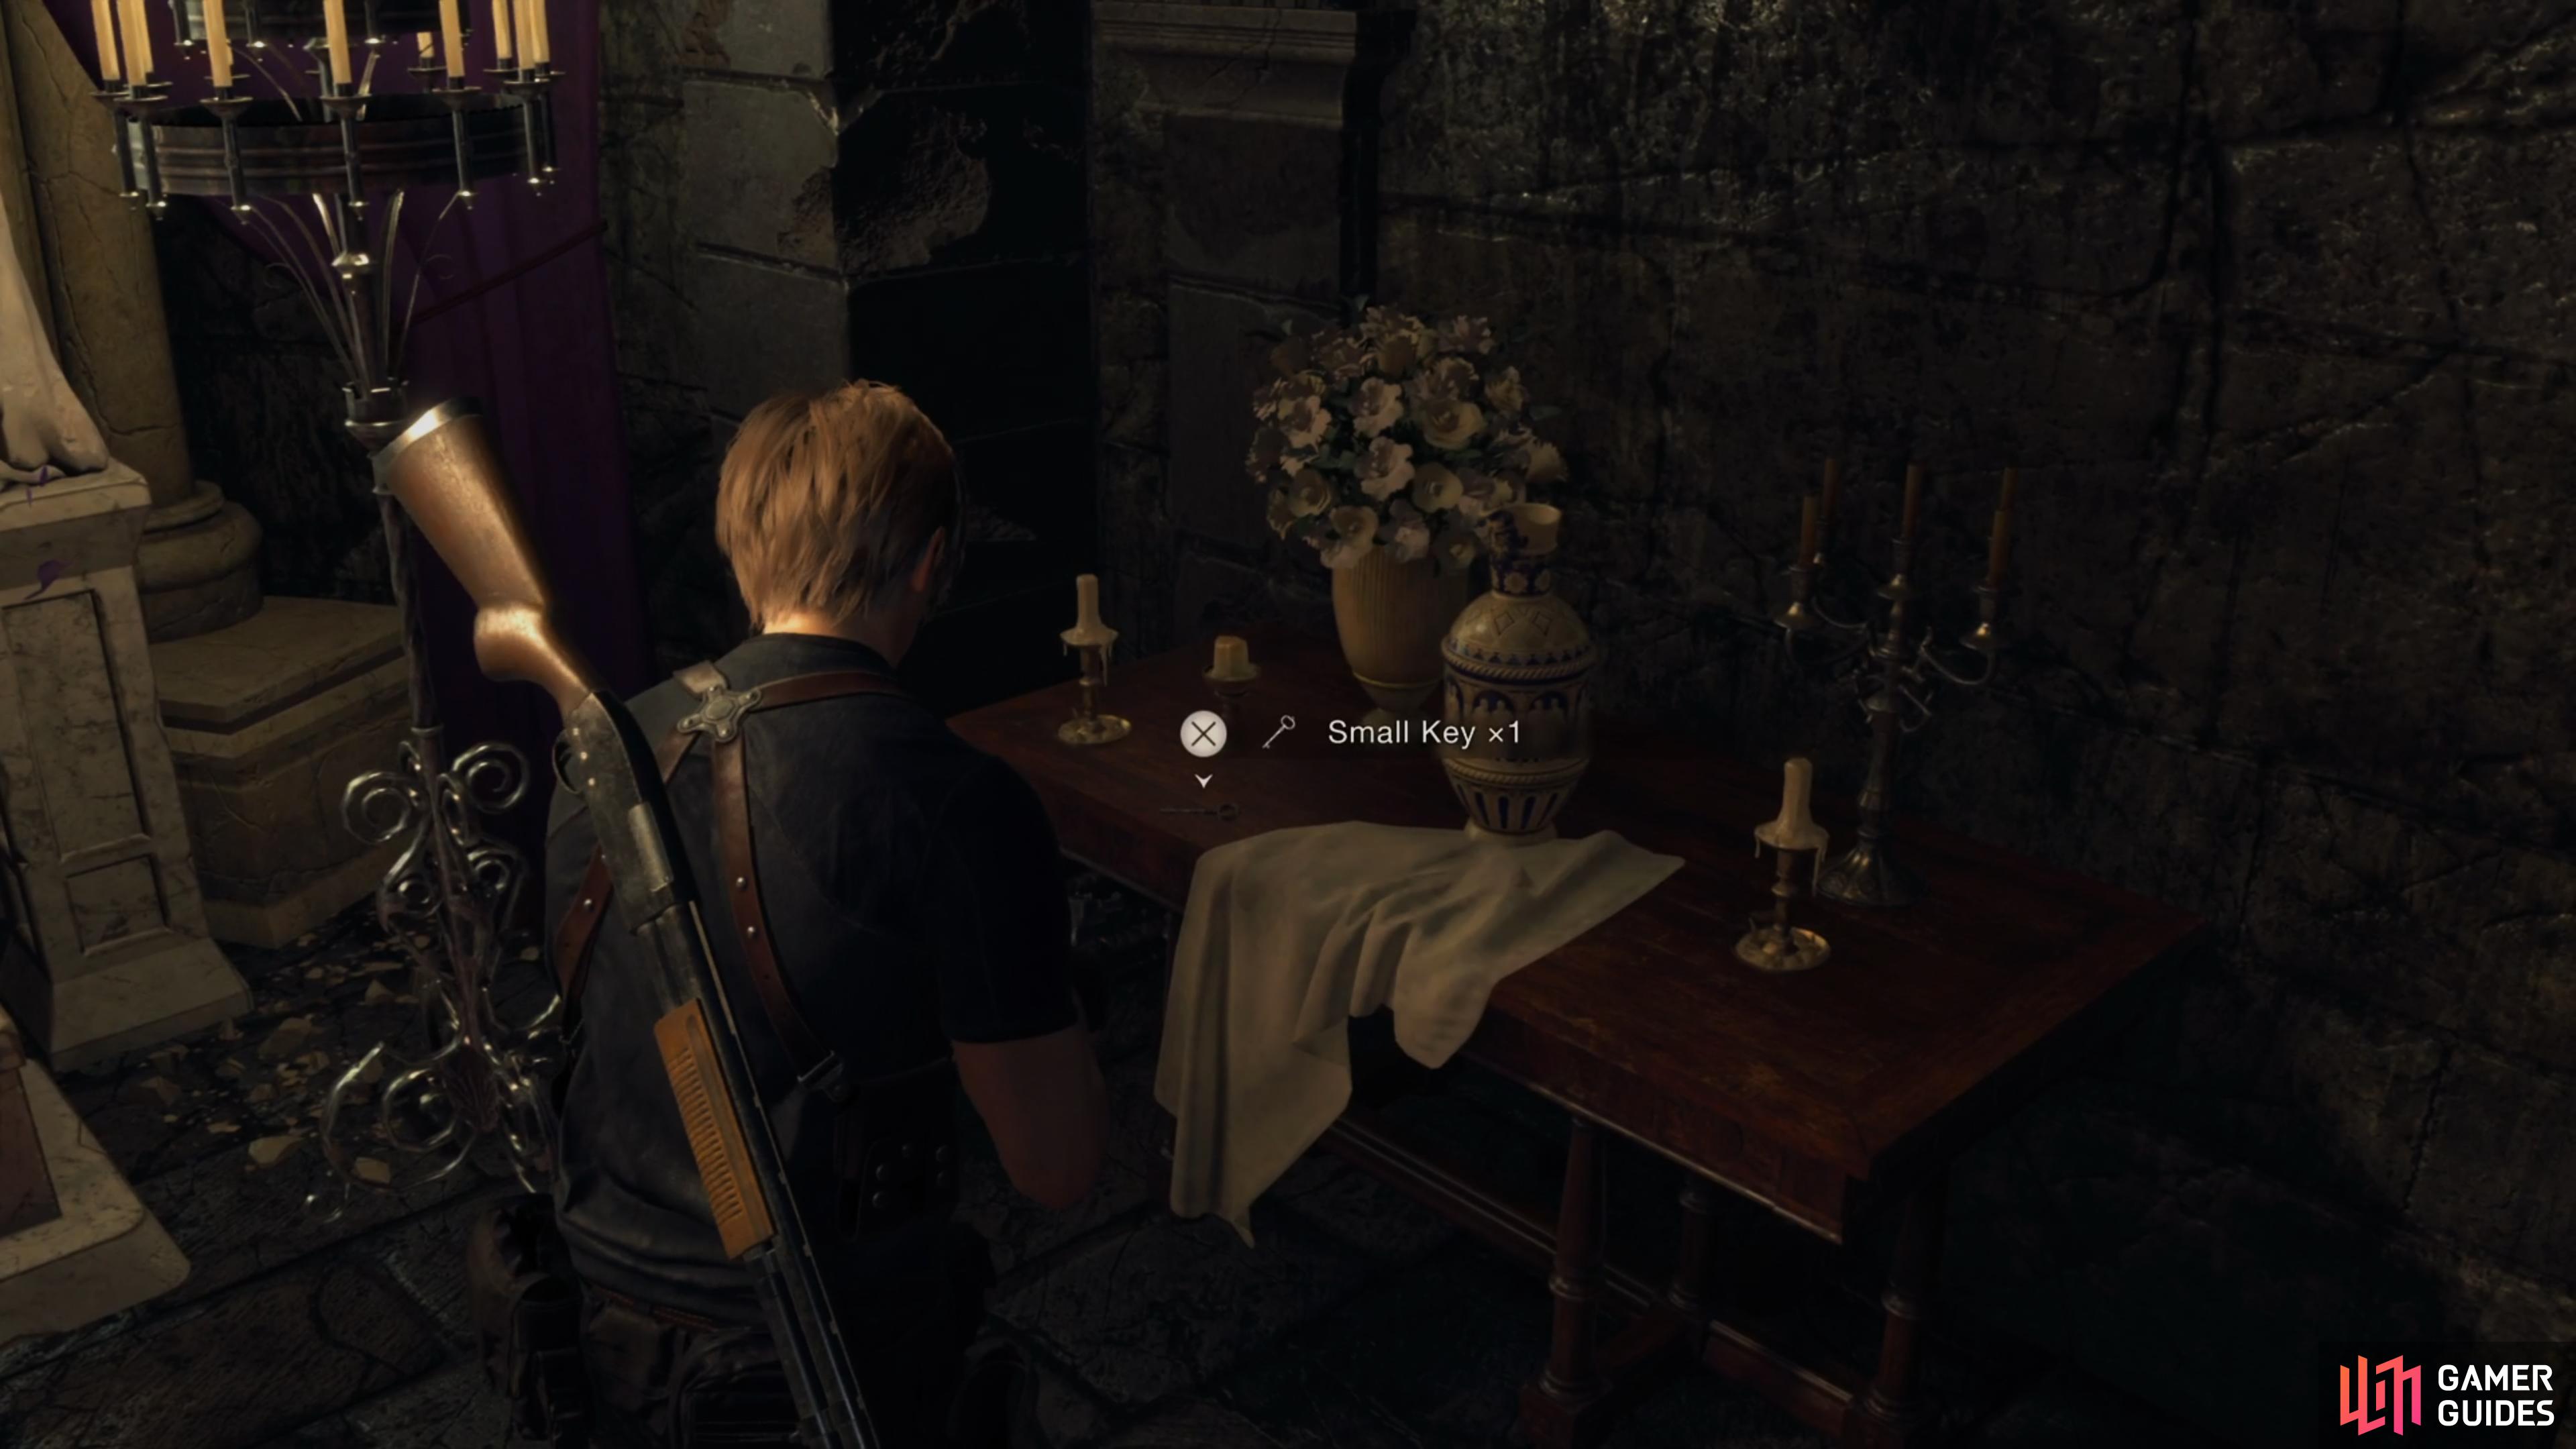 You will need to find the Small Keys to open the locked drawers in RE4 Remake.